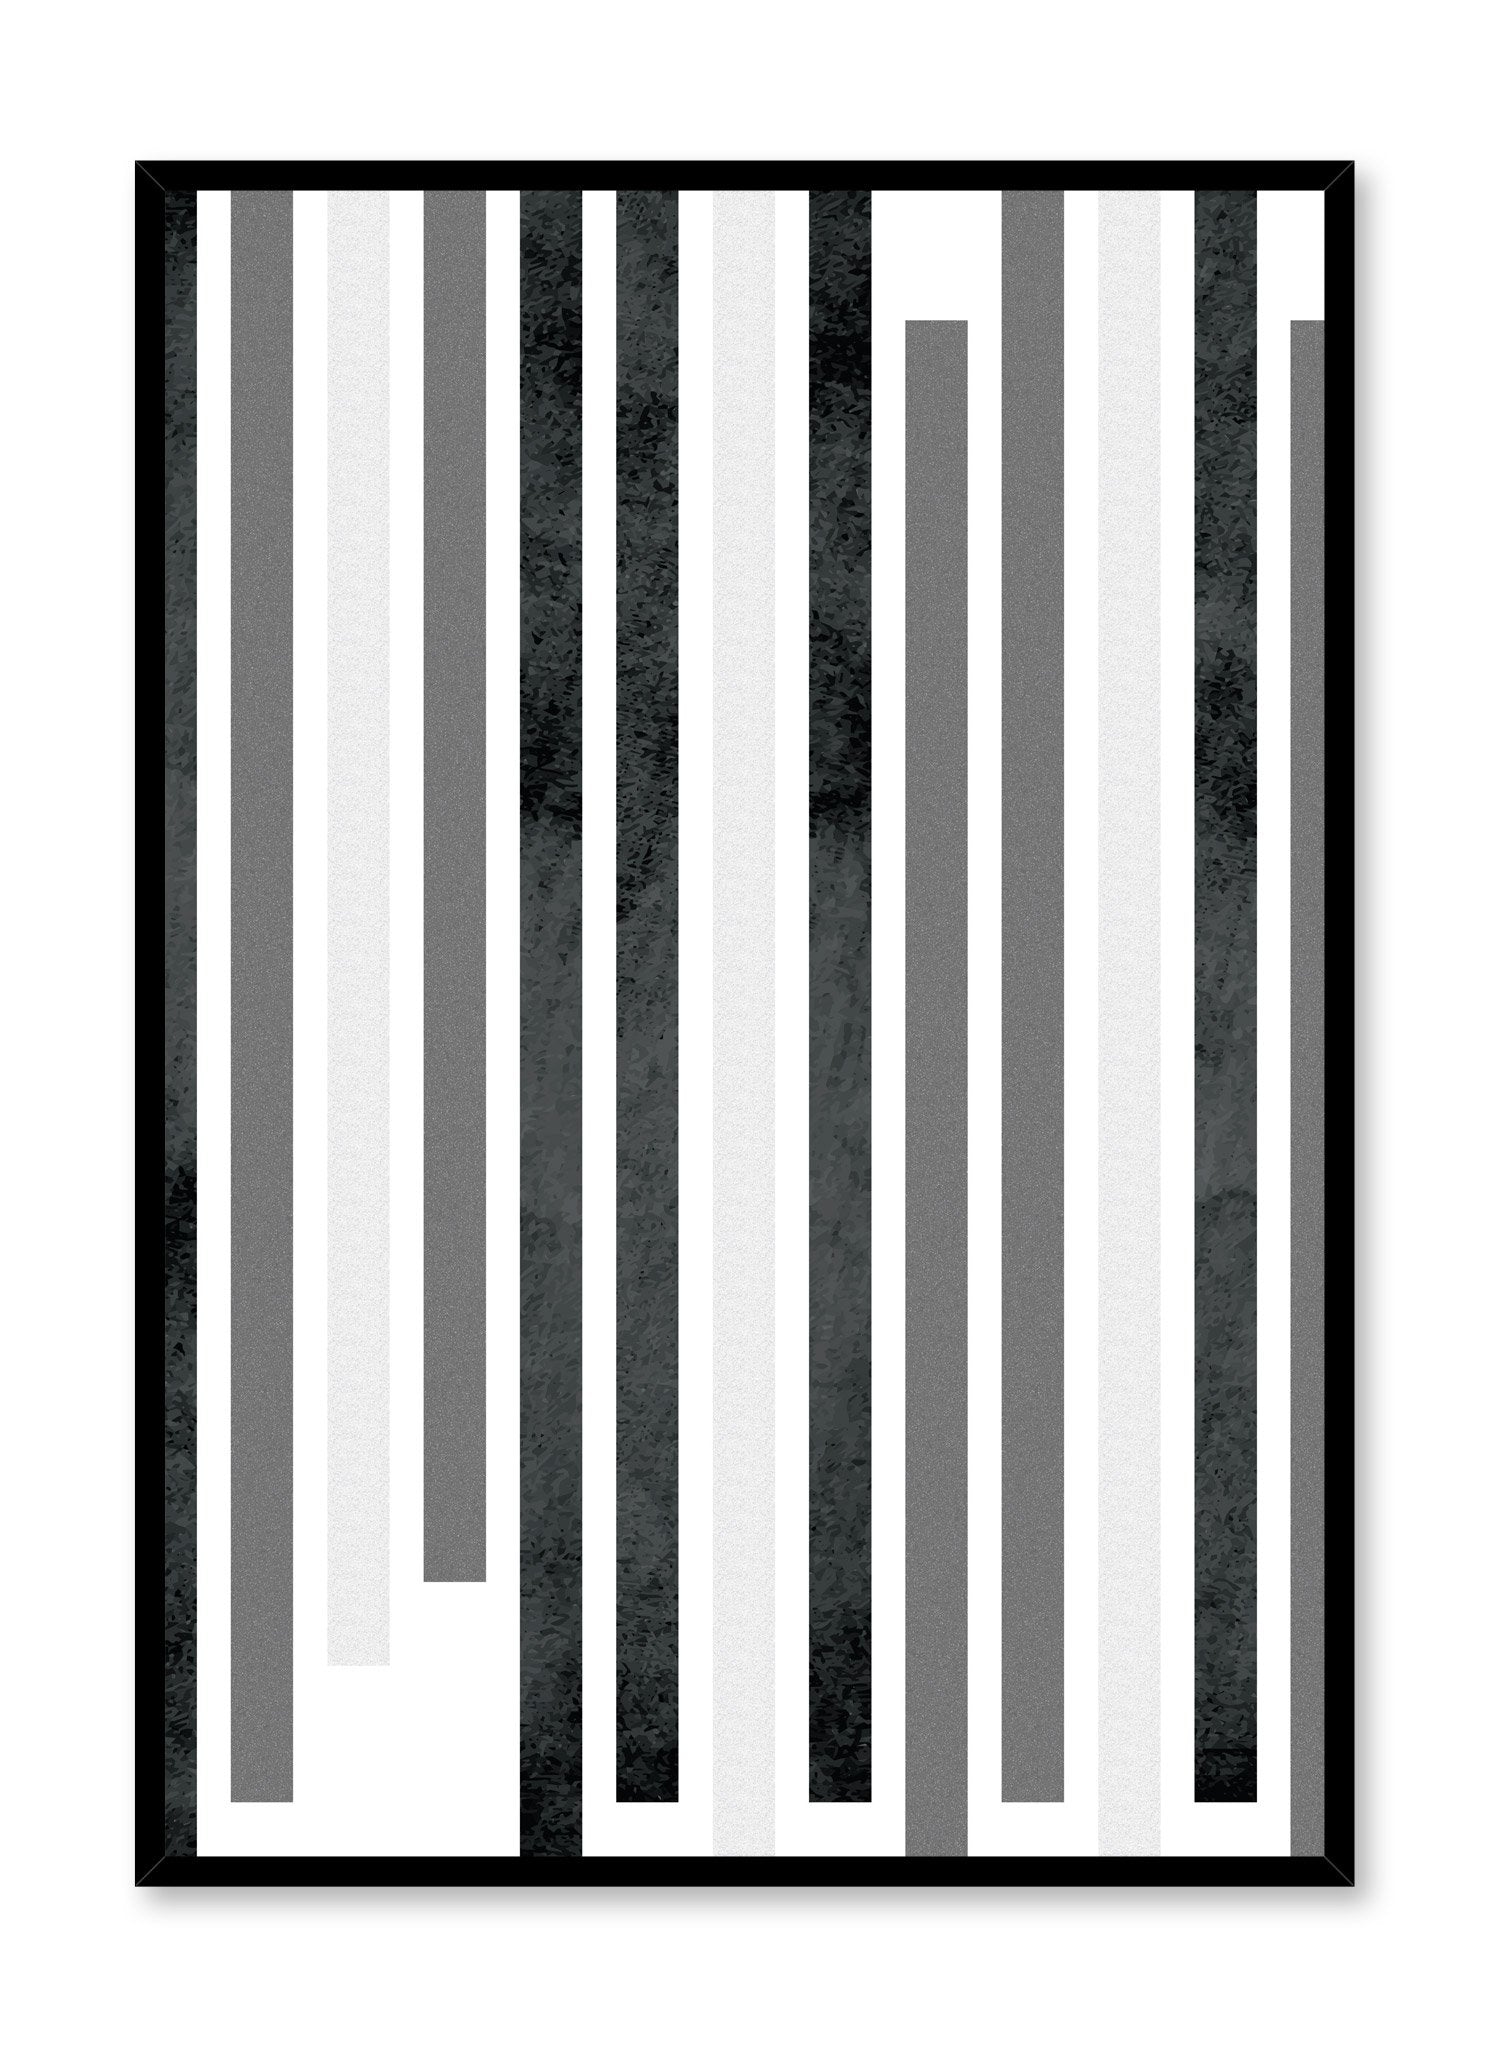 Scandinavian art print by Opposite Wall with Zoom Out black and white graphic textured lines design